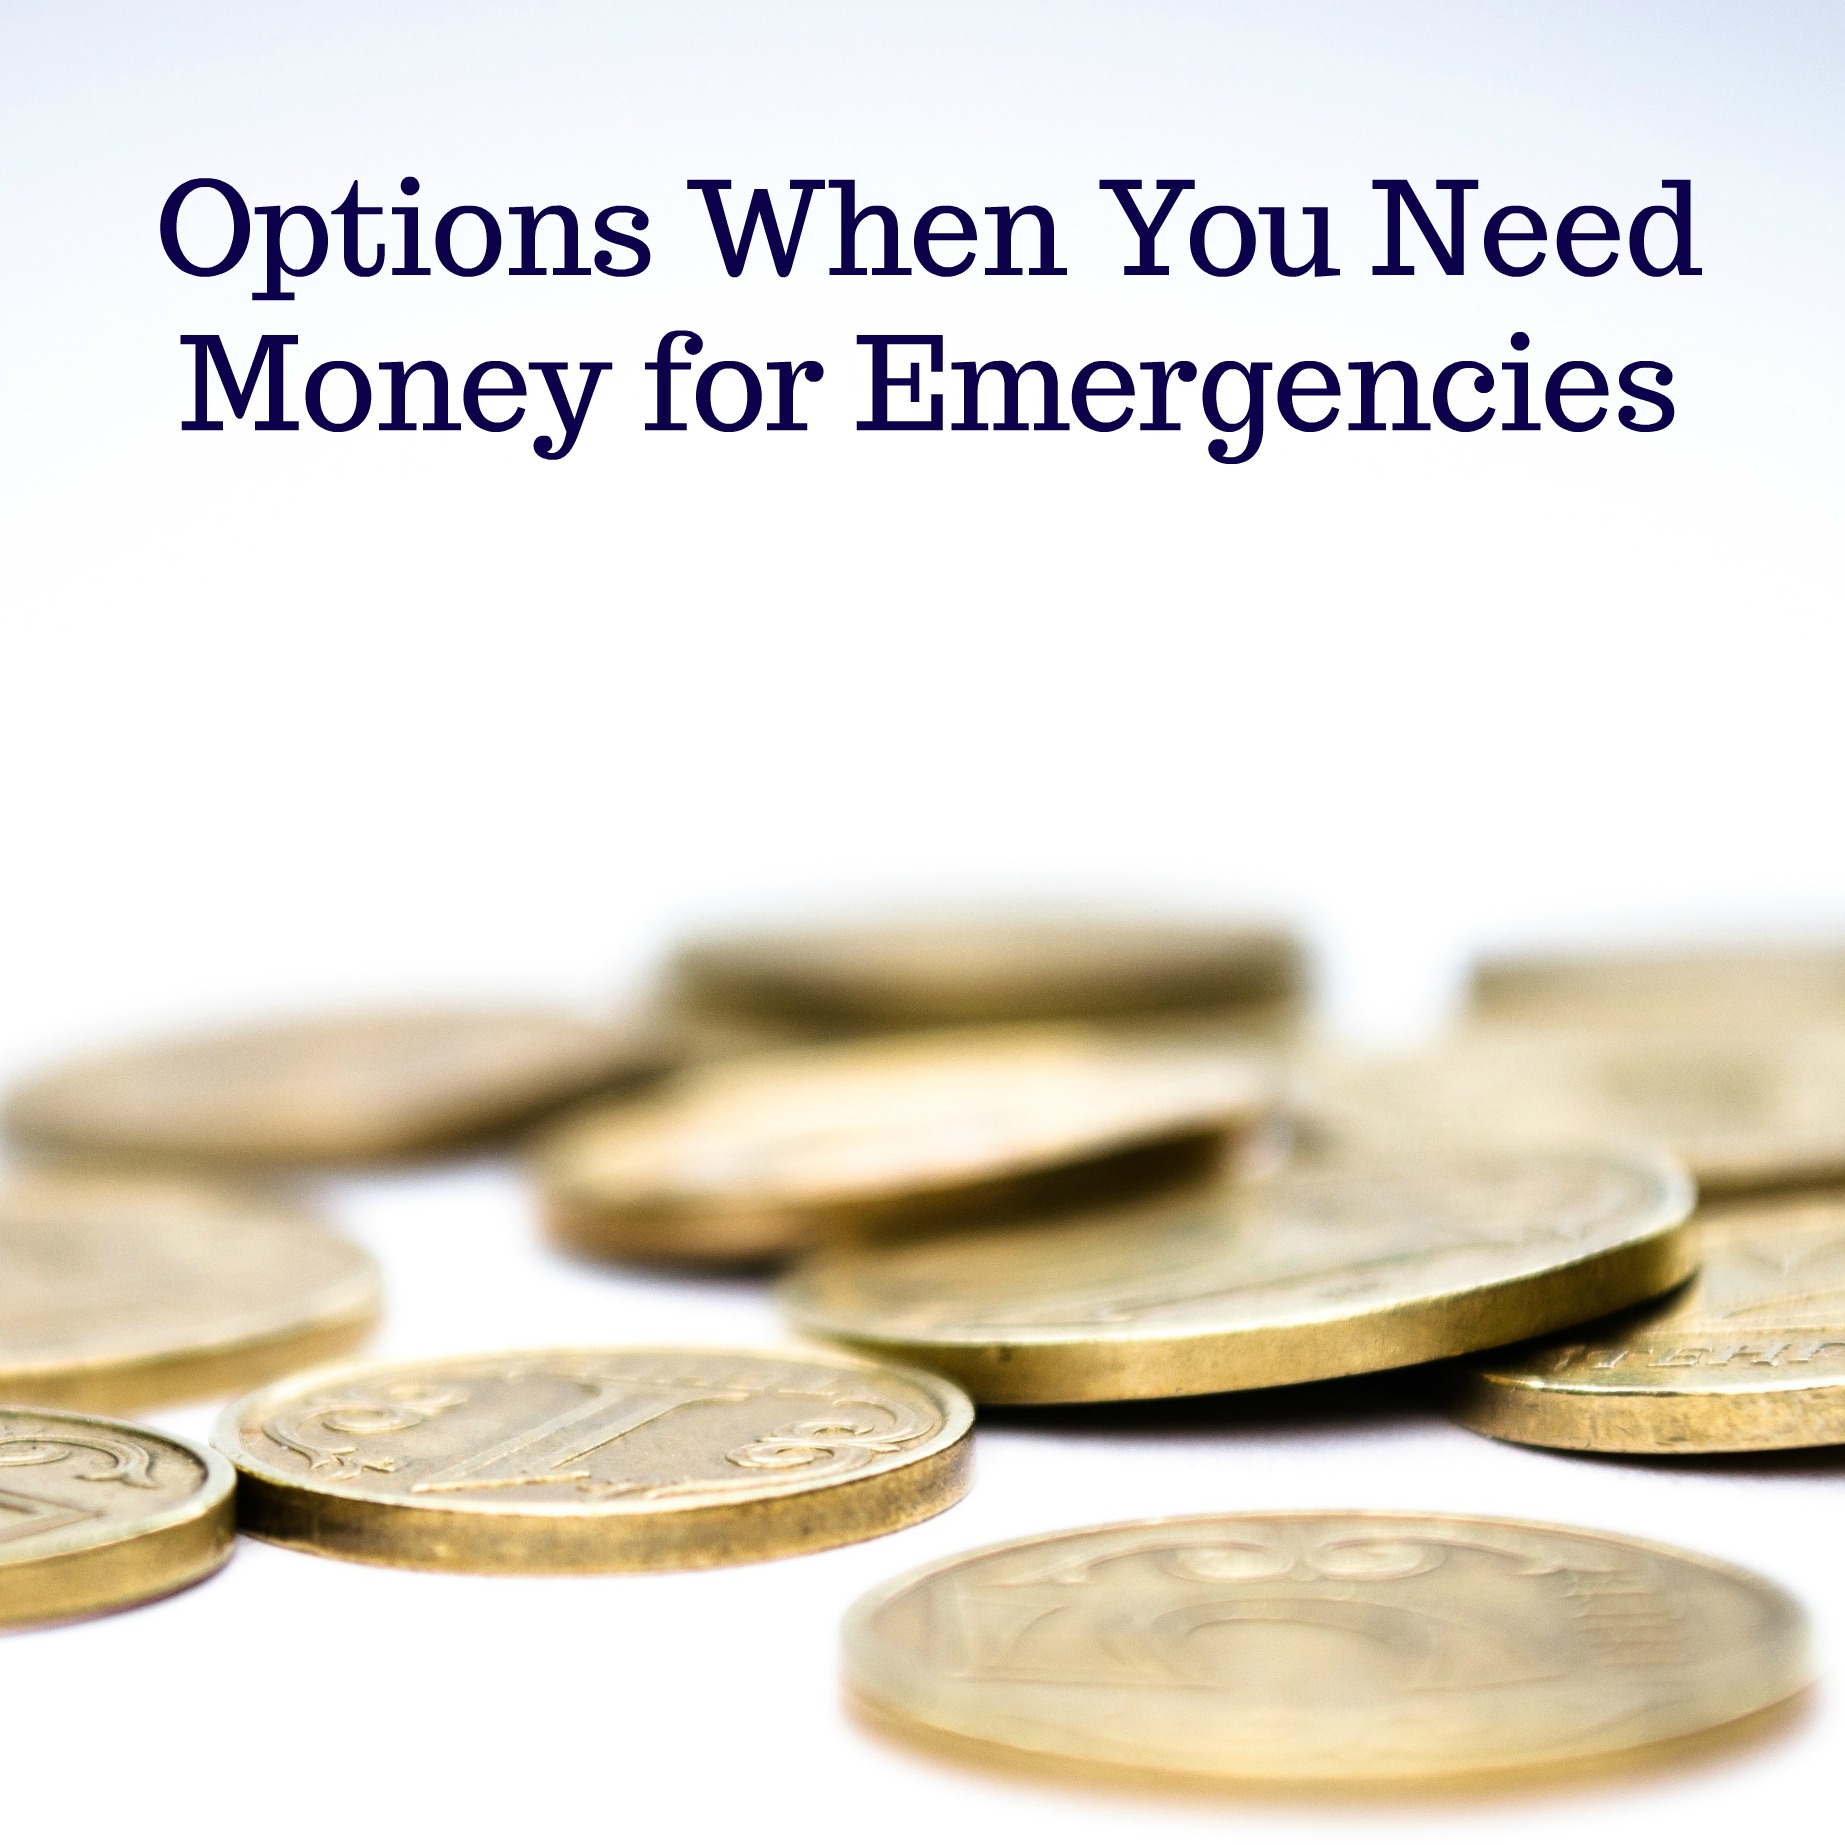 Options When You Need Money for Emergencies